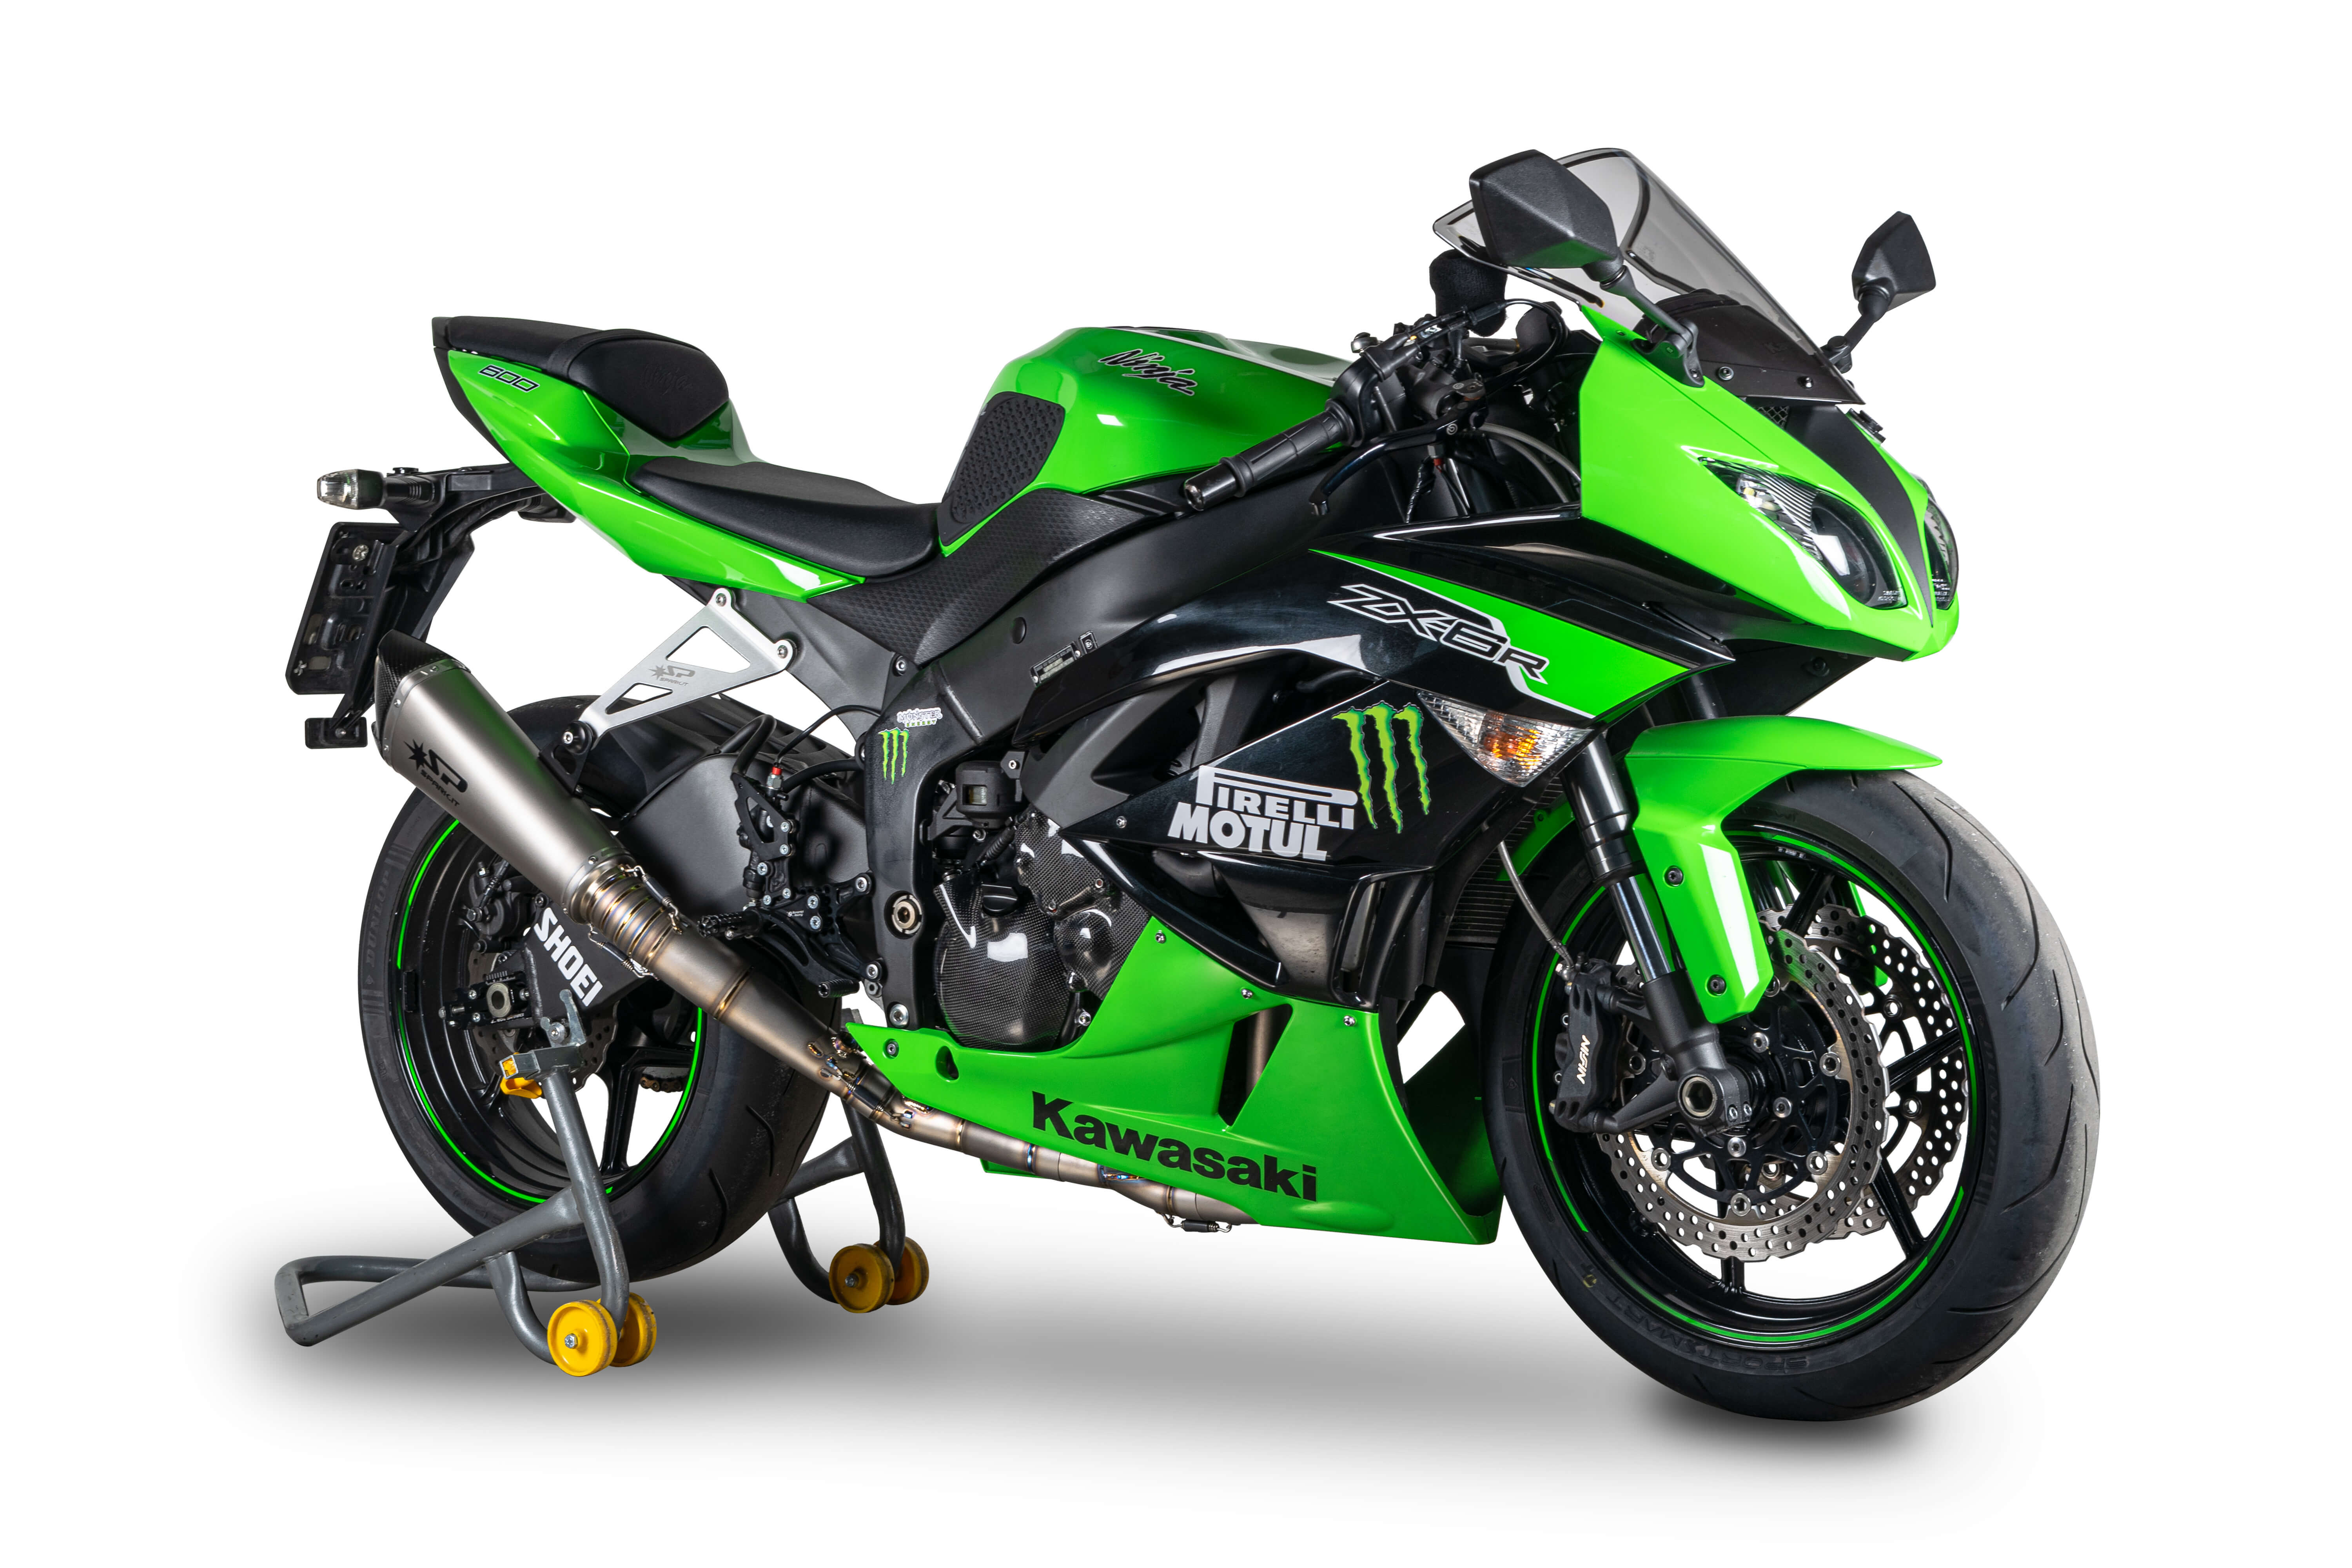 Full exhaust system for Ninja 636 ZX-6R | Spark Exhaust